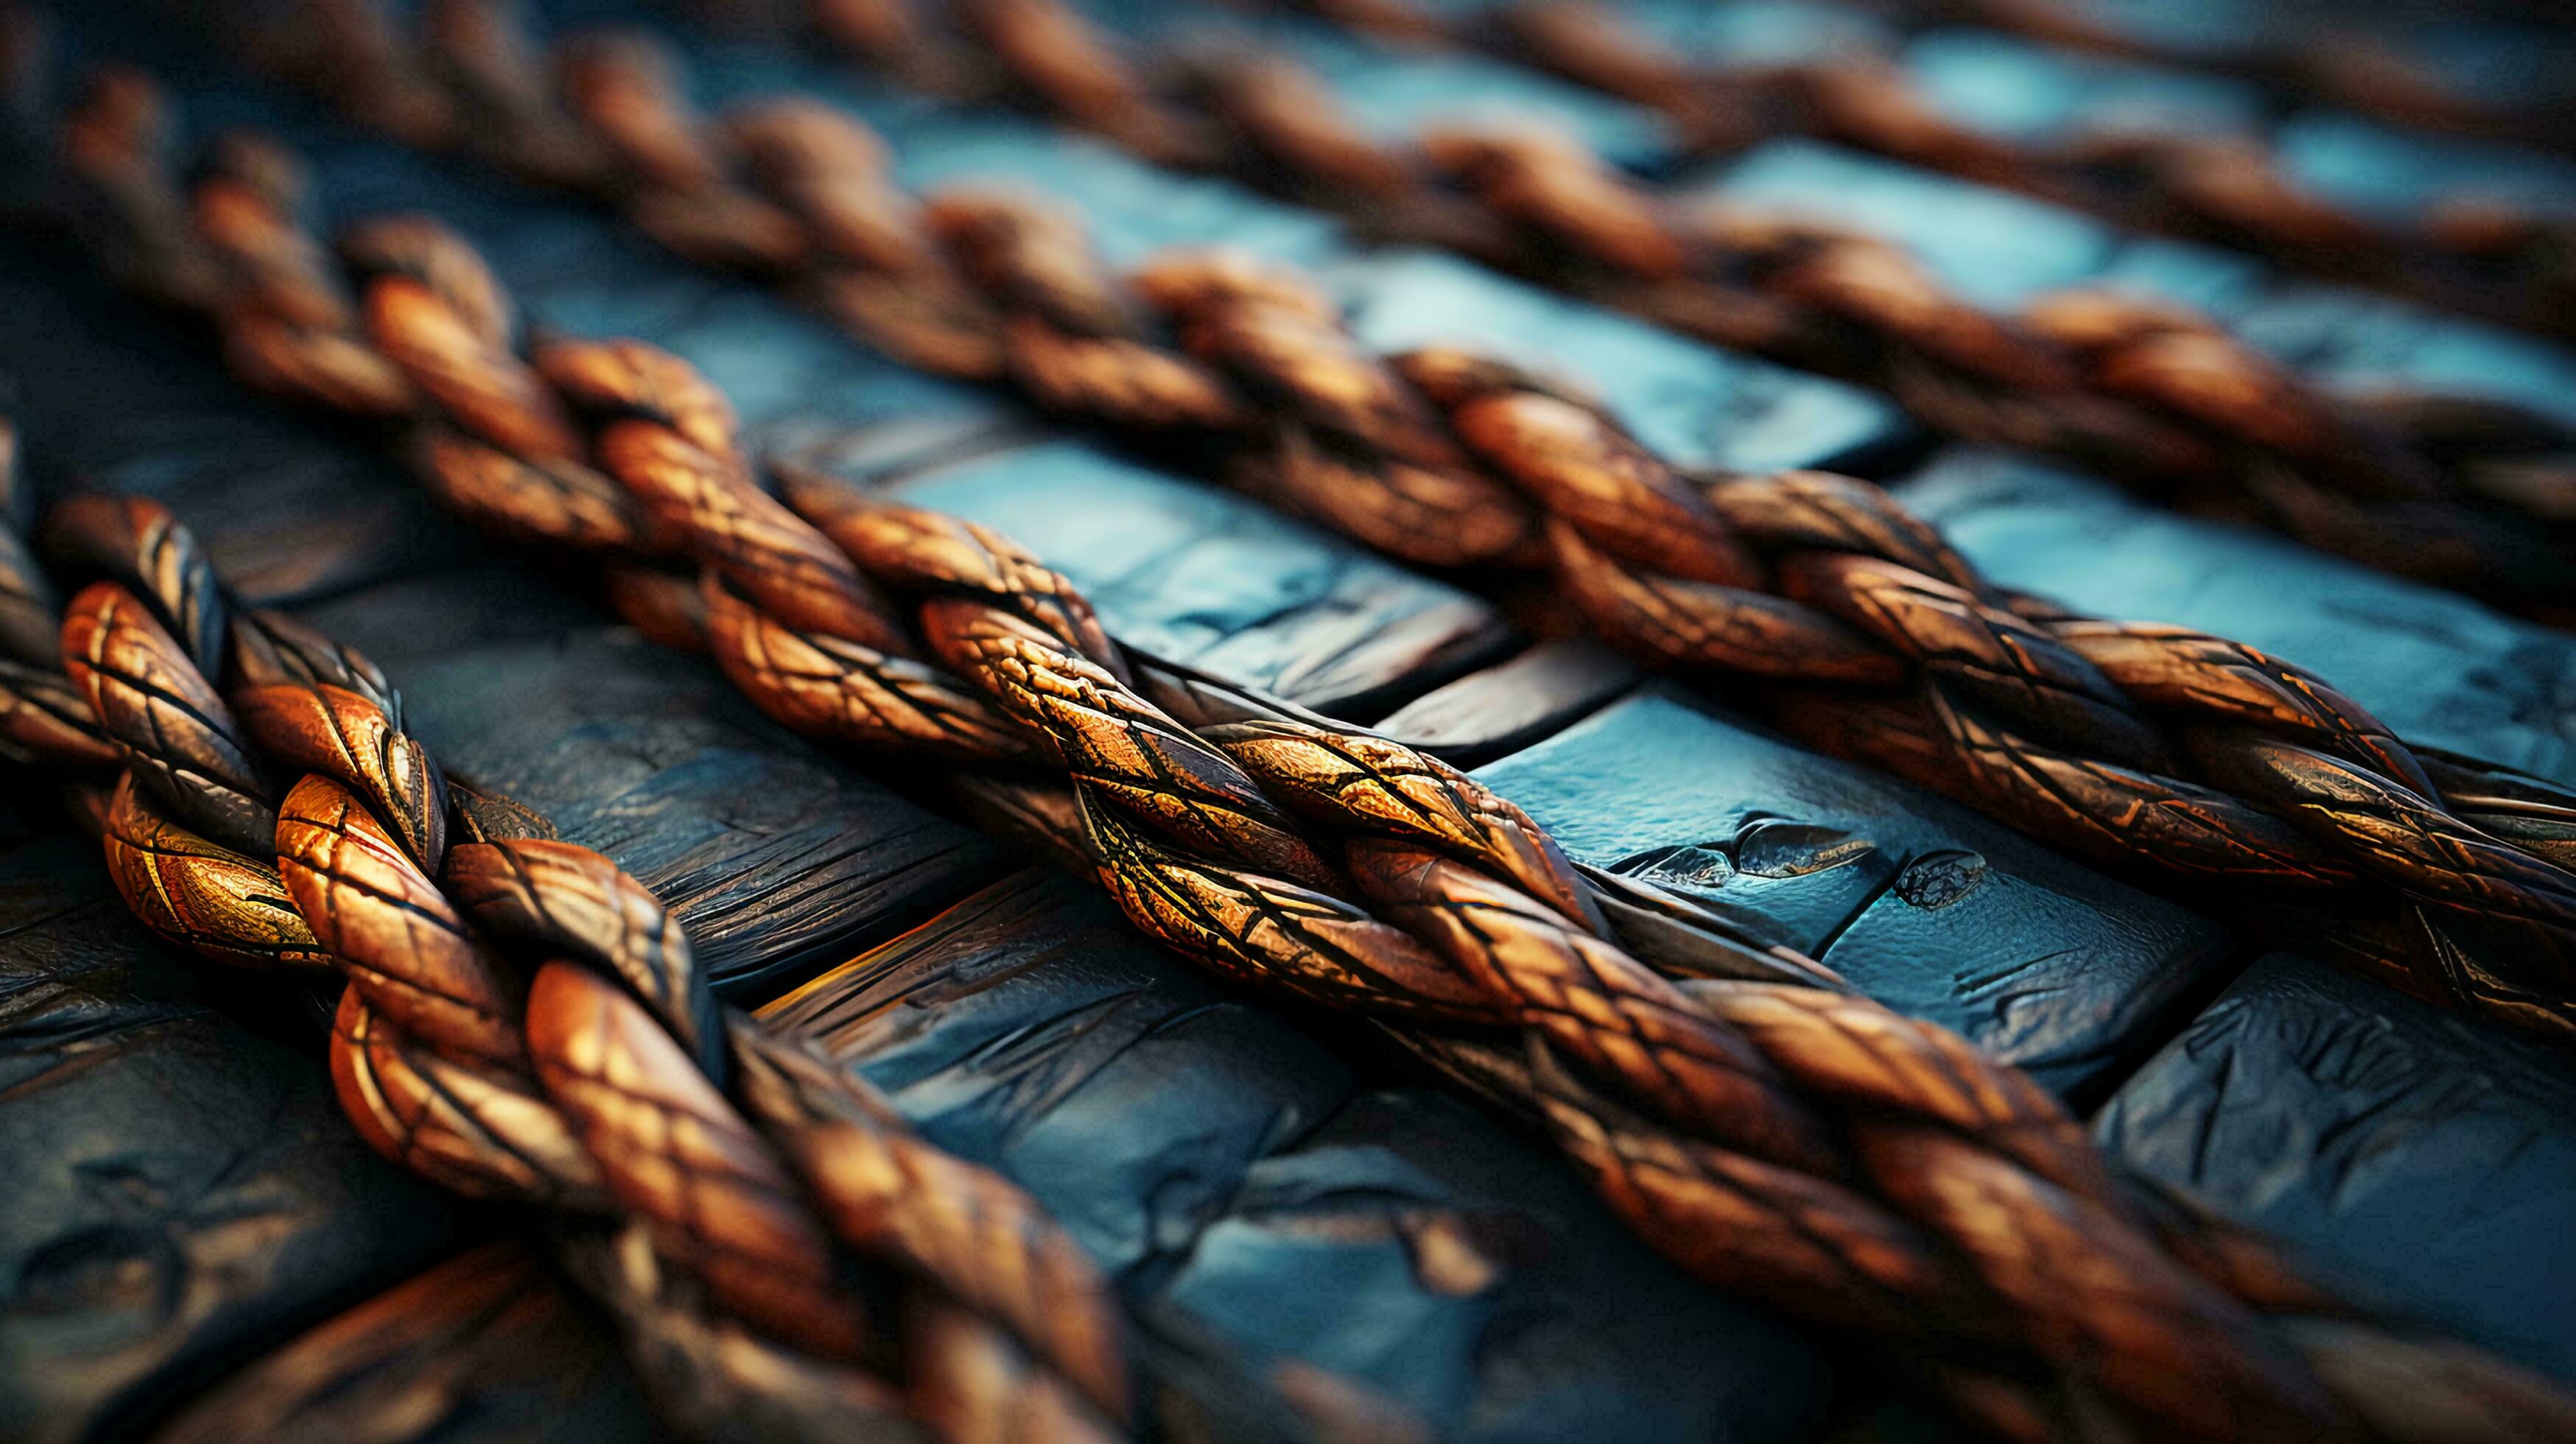 Large thick strong marine ropes for ships lie on a wooden pier